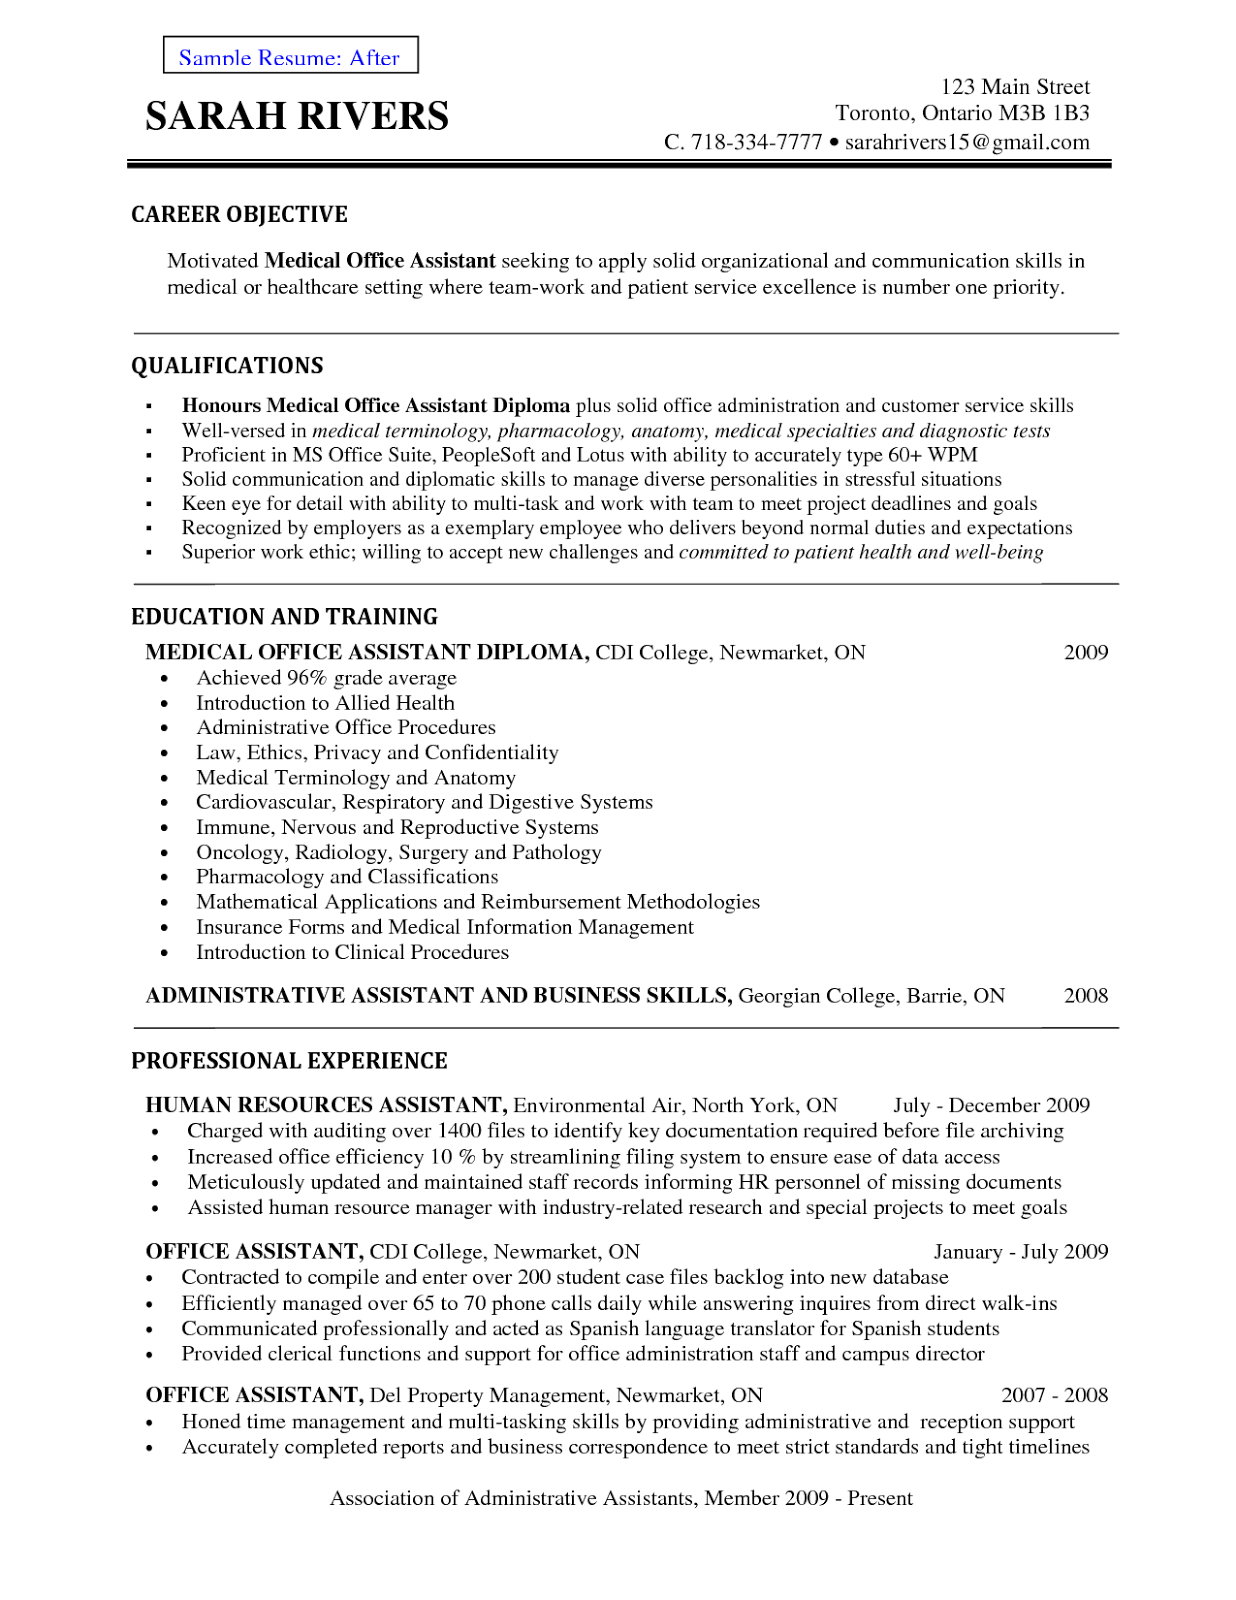 Convenience Store Manager Resume